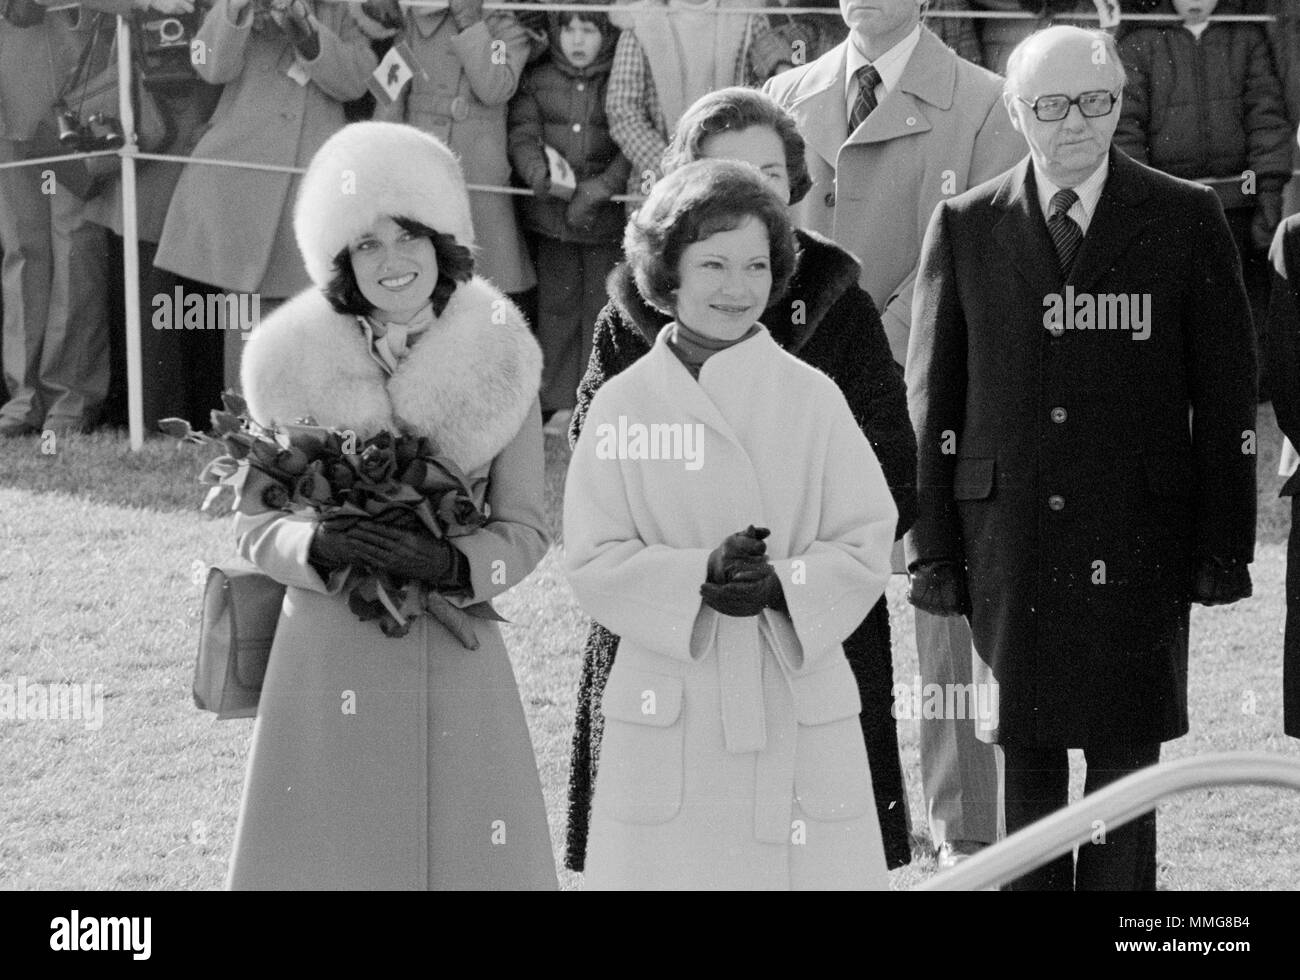 Margaret Trudeau (wife of Pierre Trudeau, 15th Prime Minister of Canada), left and Eleanor Rosalynn Carter (wife of President of the United States, Jimmy Carter) 1977 Stock Photo